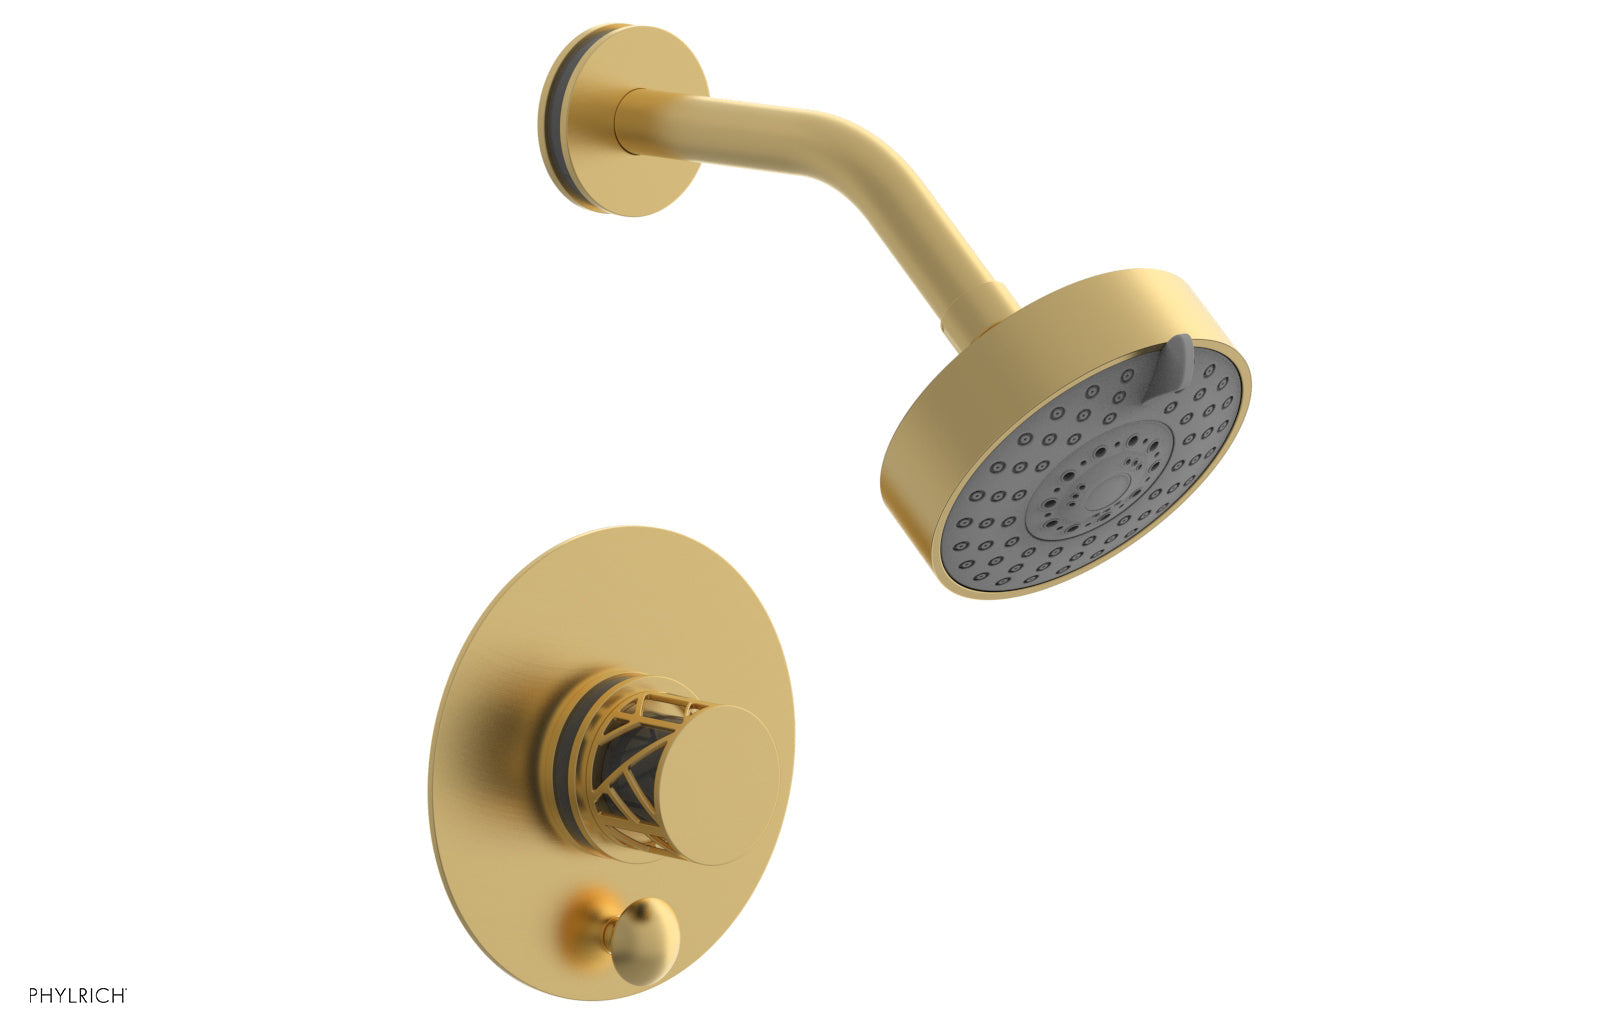 Phylrich JOLIE Pressure Balance Shower and Diverter Set (Less Spout), Round Handle with "Grey" Accents